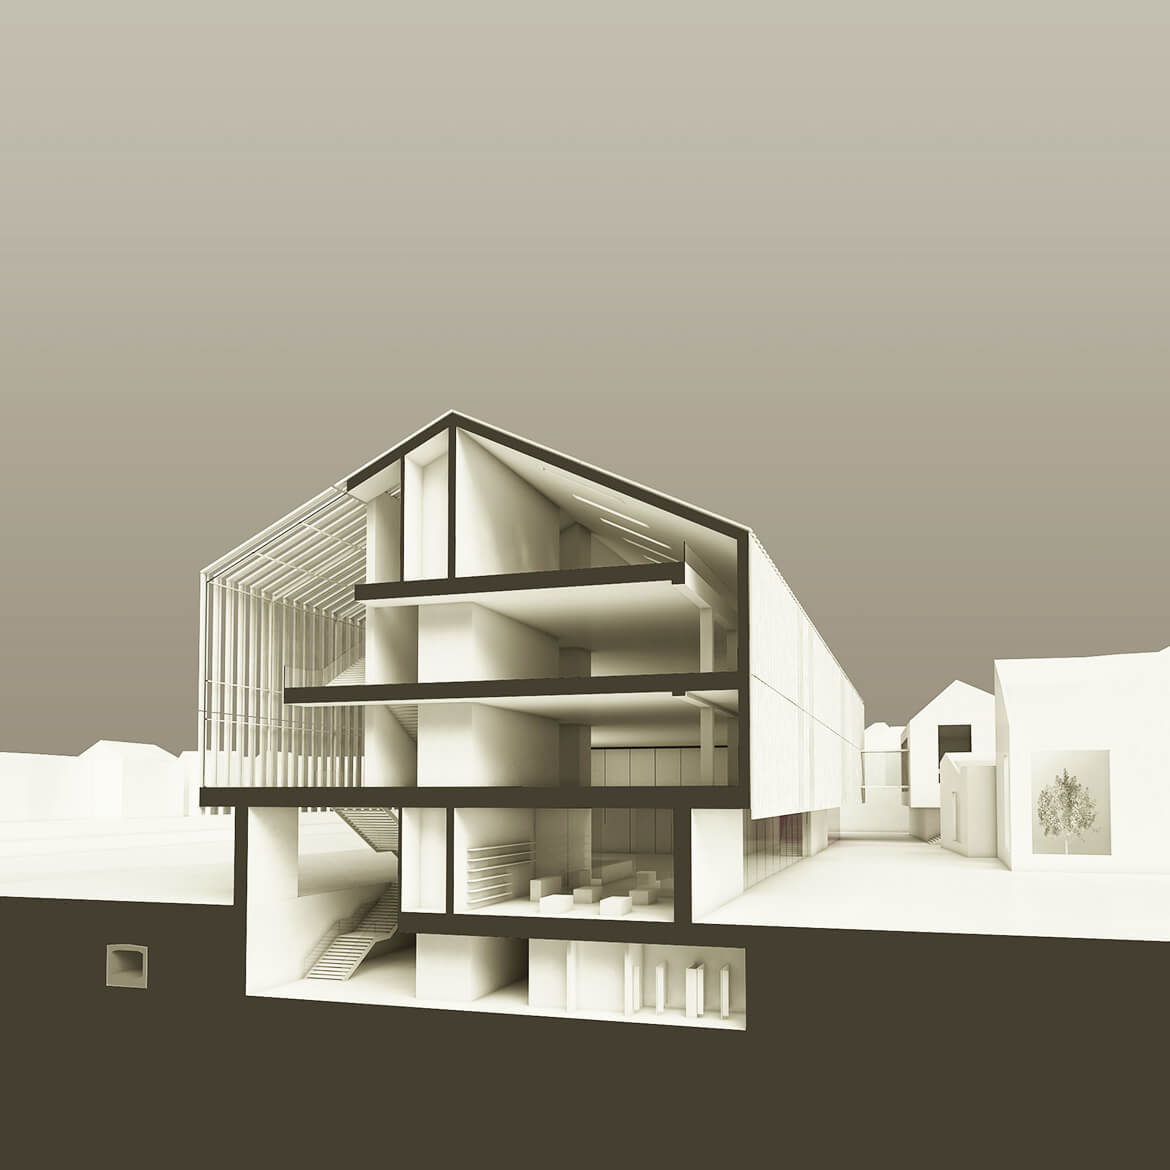 MolaArch_MdBG_Render_Section 01